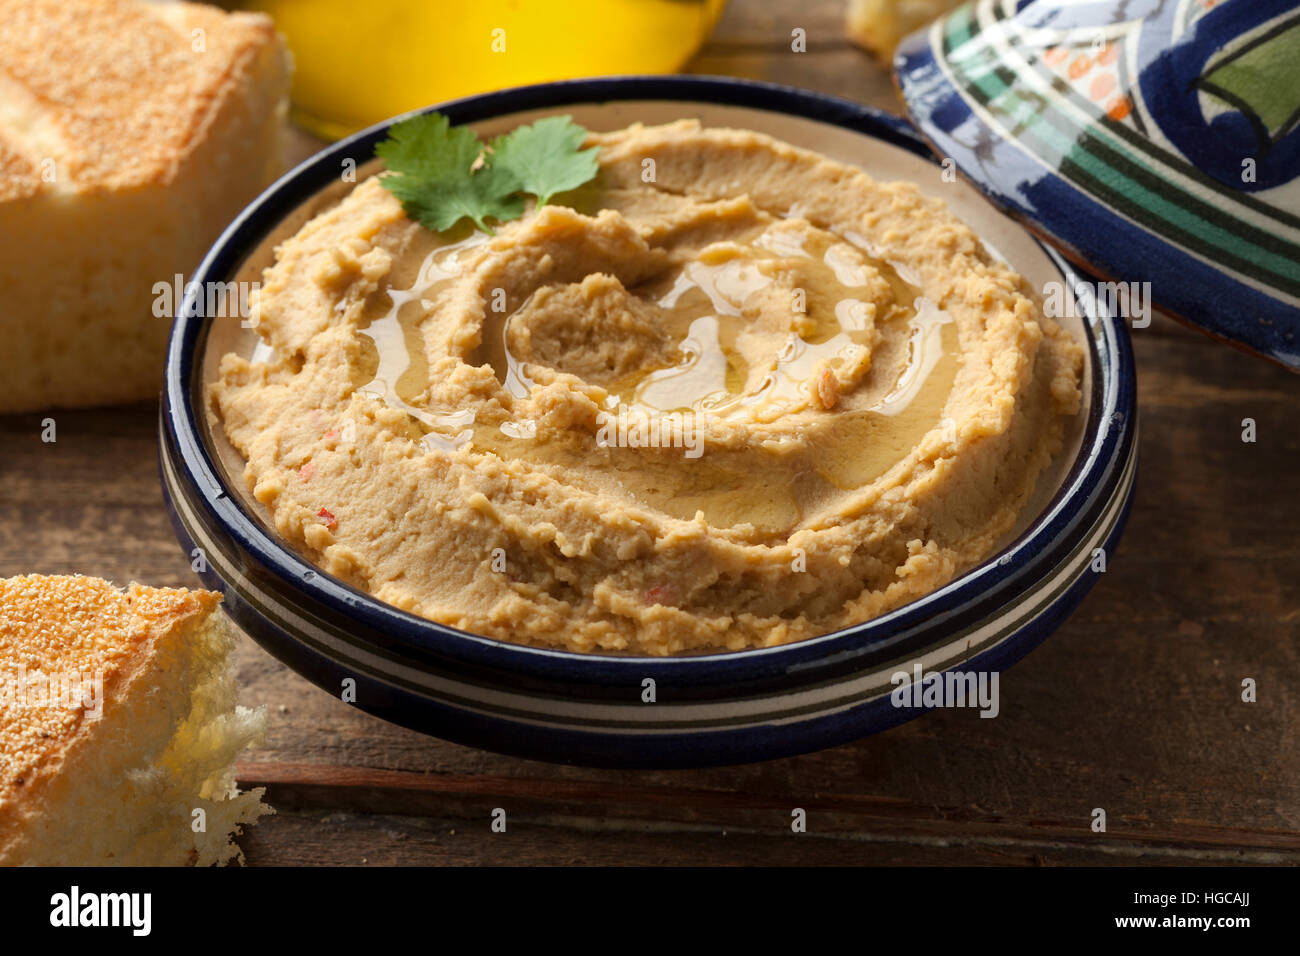 Bowl with Moroccan hummus and olive oil Stock Photo